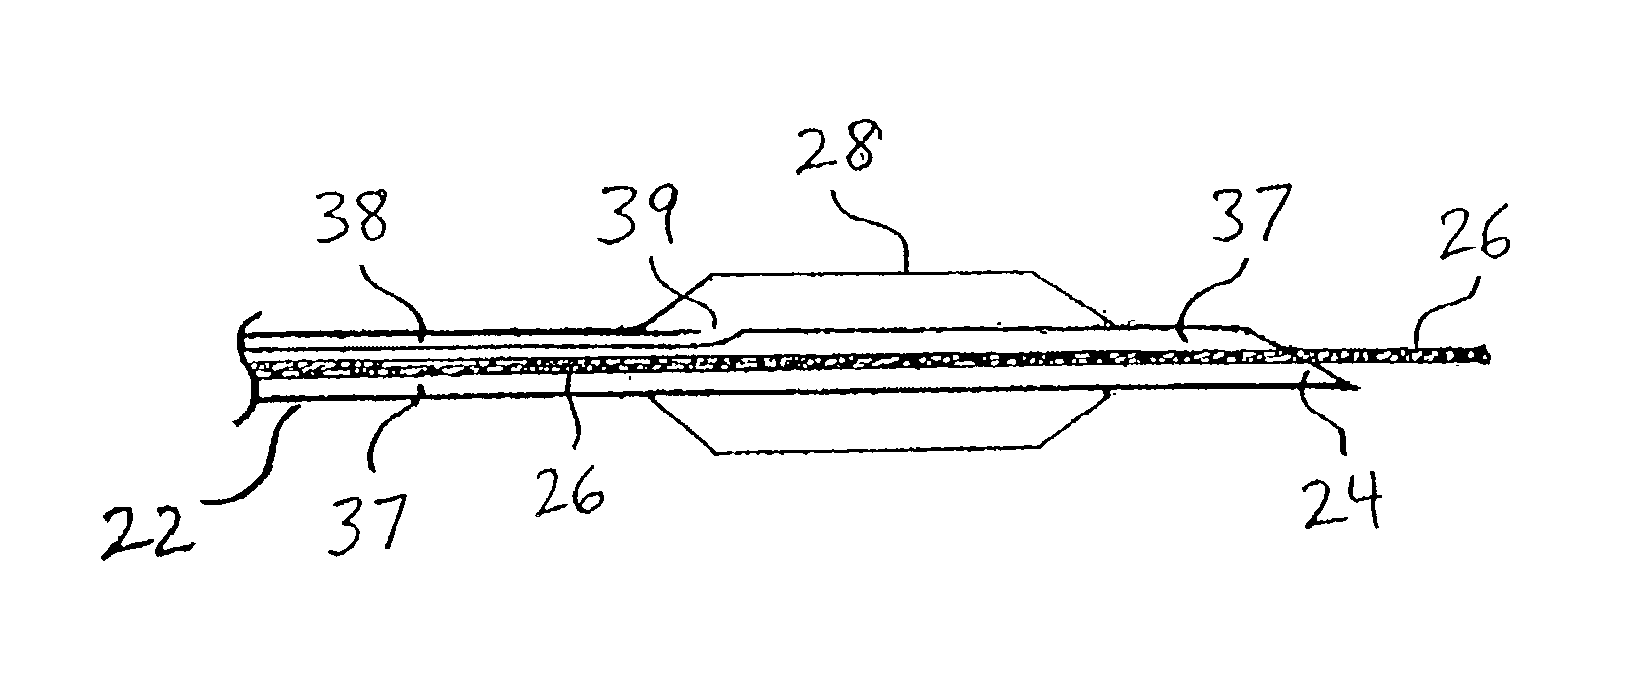 Apparatus and methods for endoscopic resection of tissue